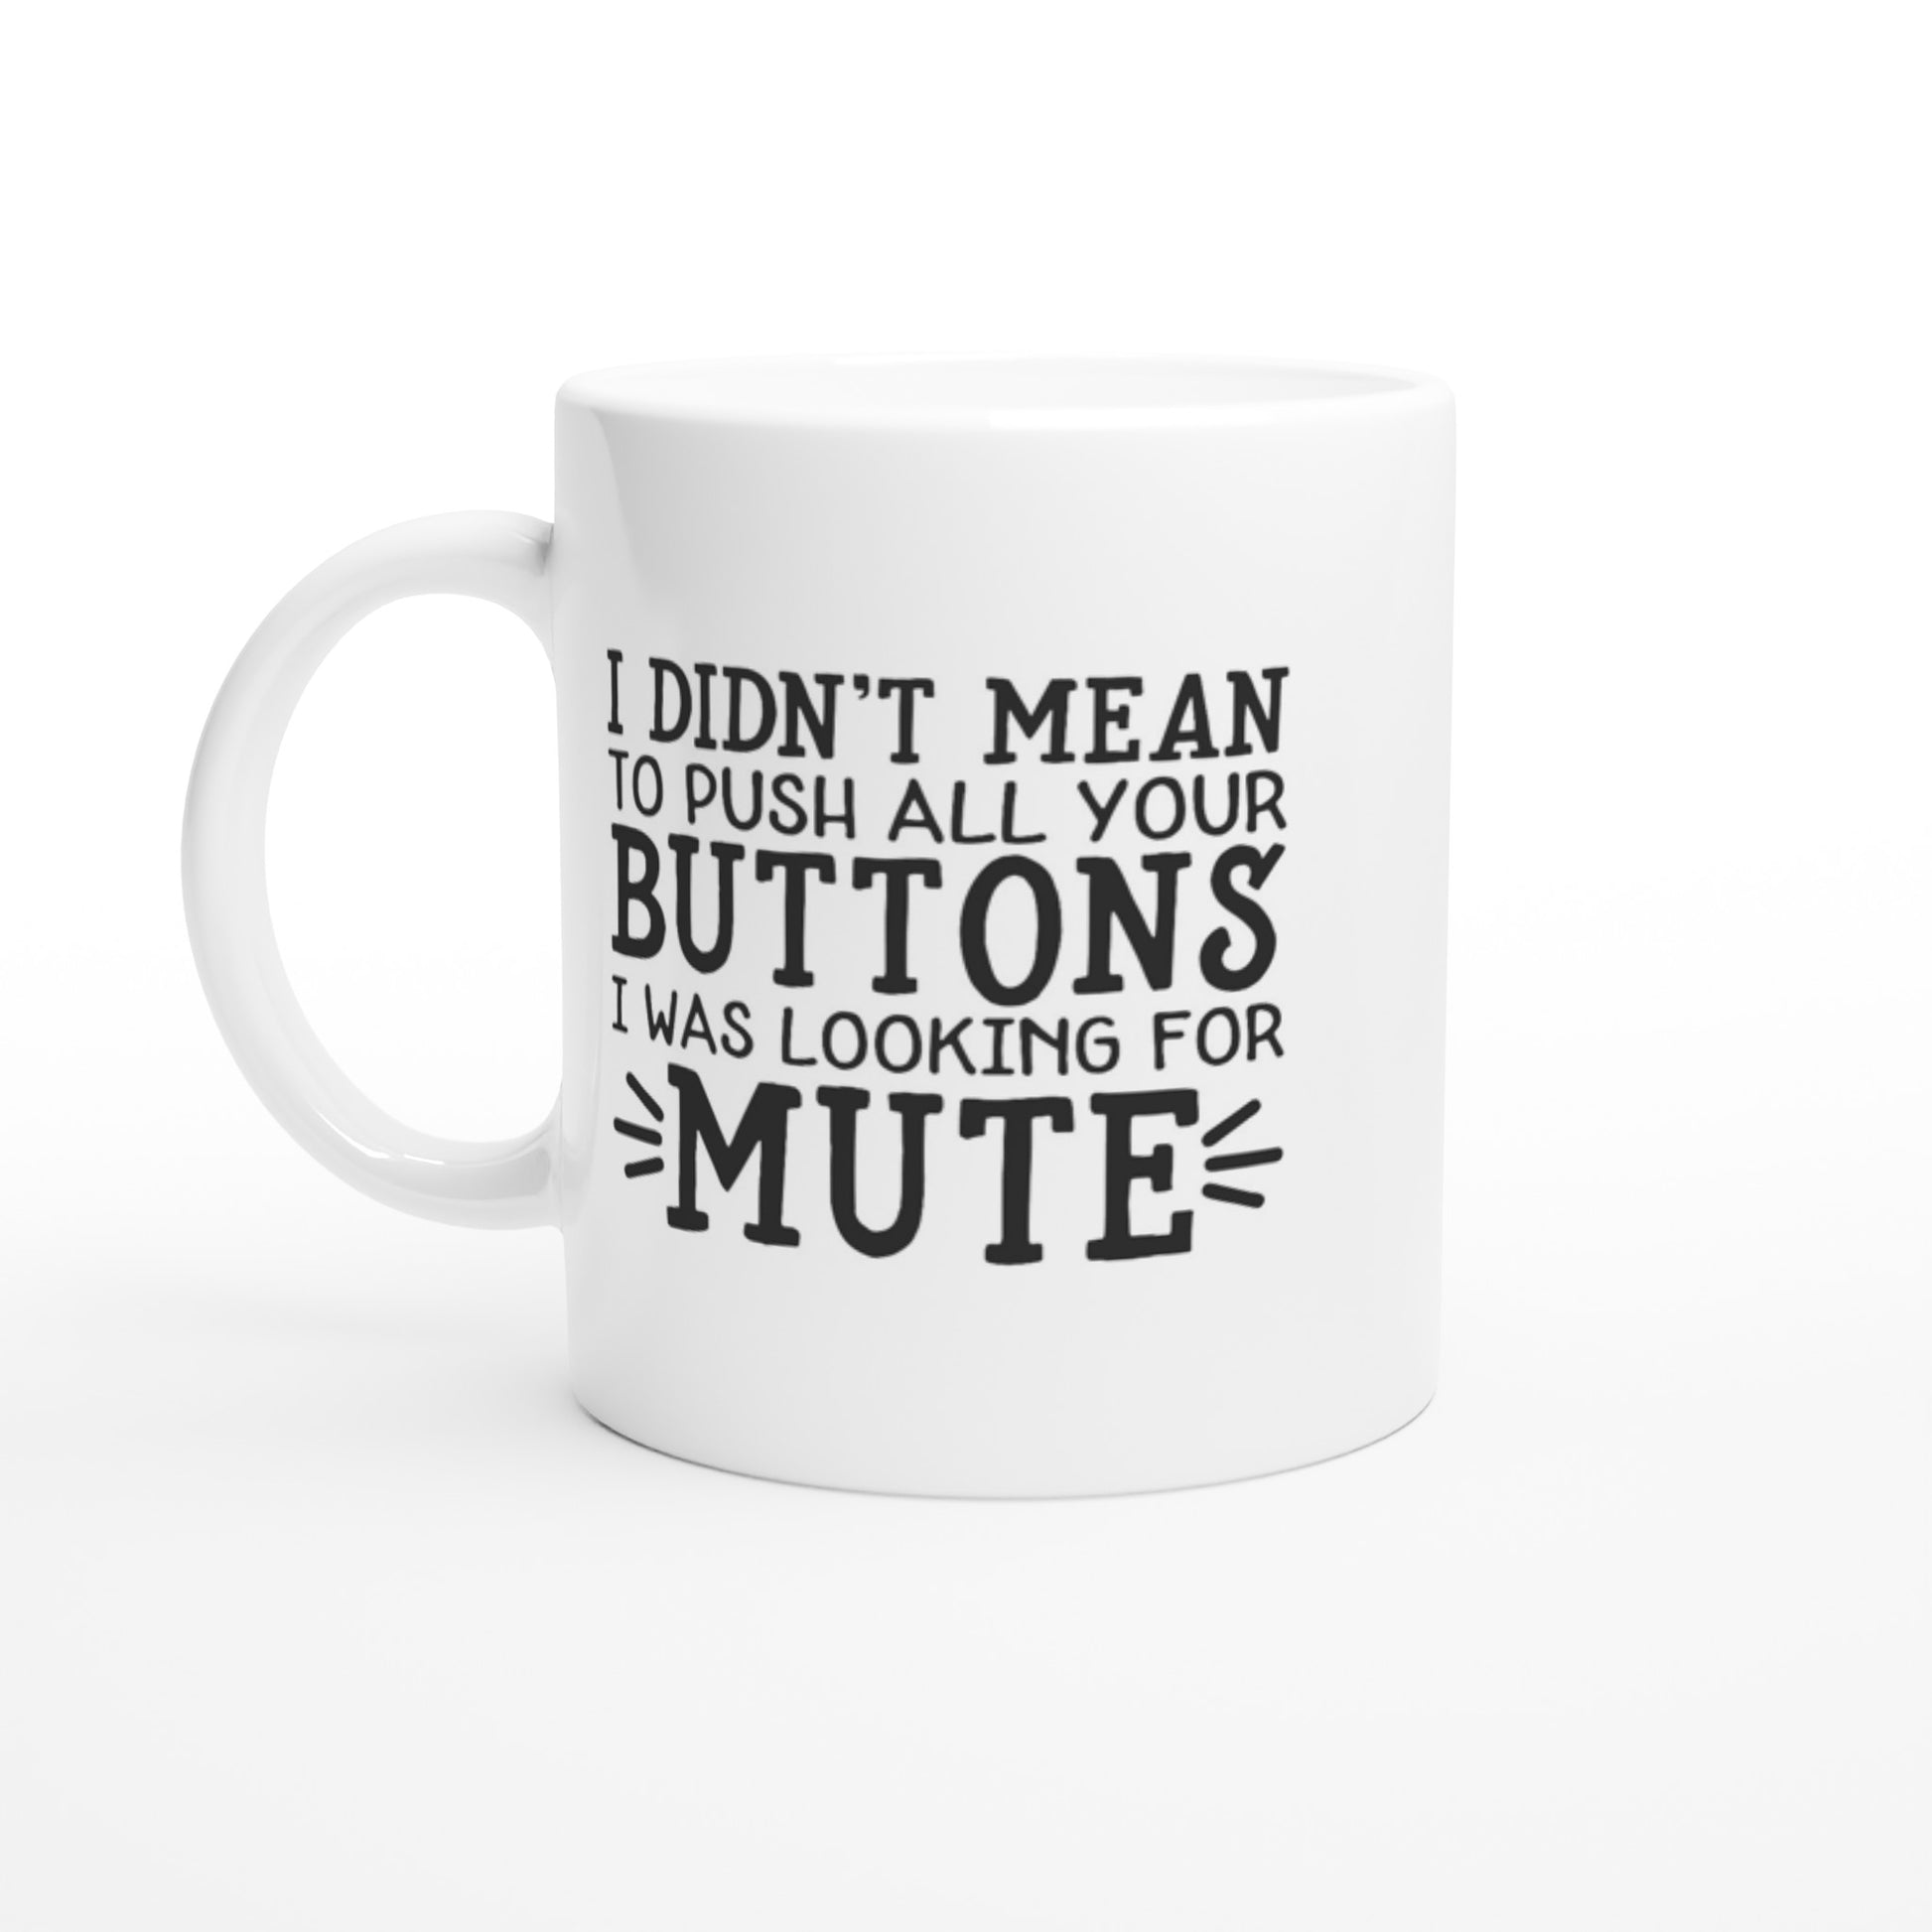 I Didn't Mean to Push All Your Buttons 11oz Mug - Mister Snarky's